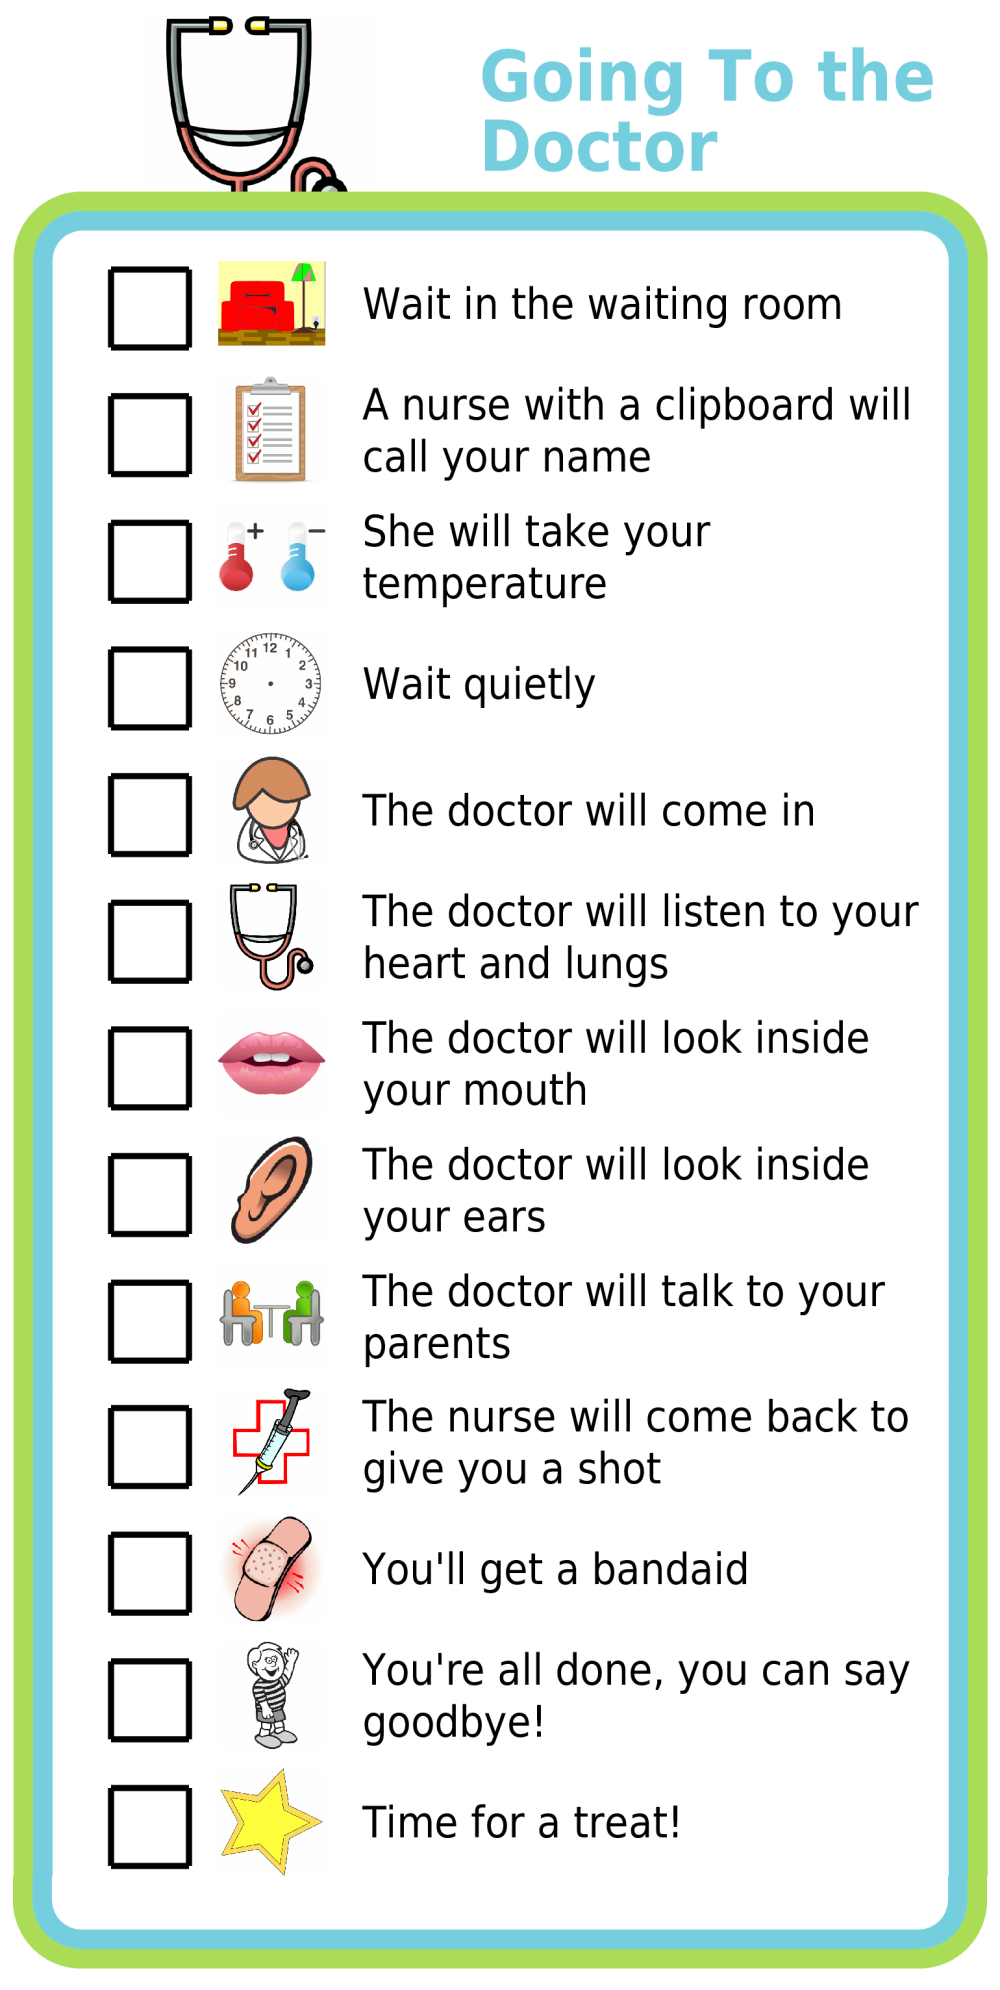 Picture checklist showing what happens at a visit to the doctor